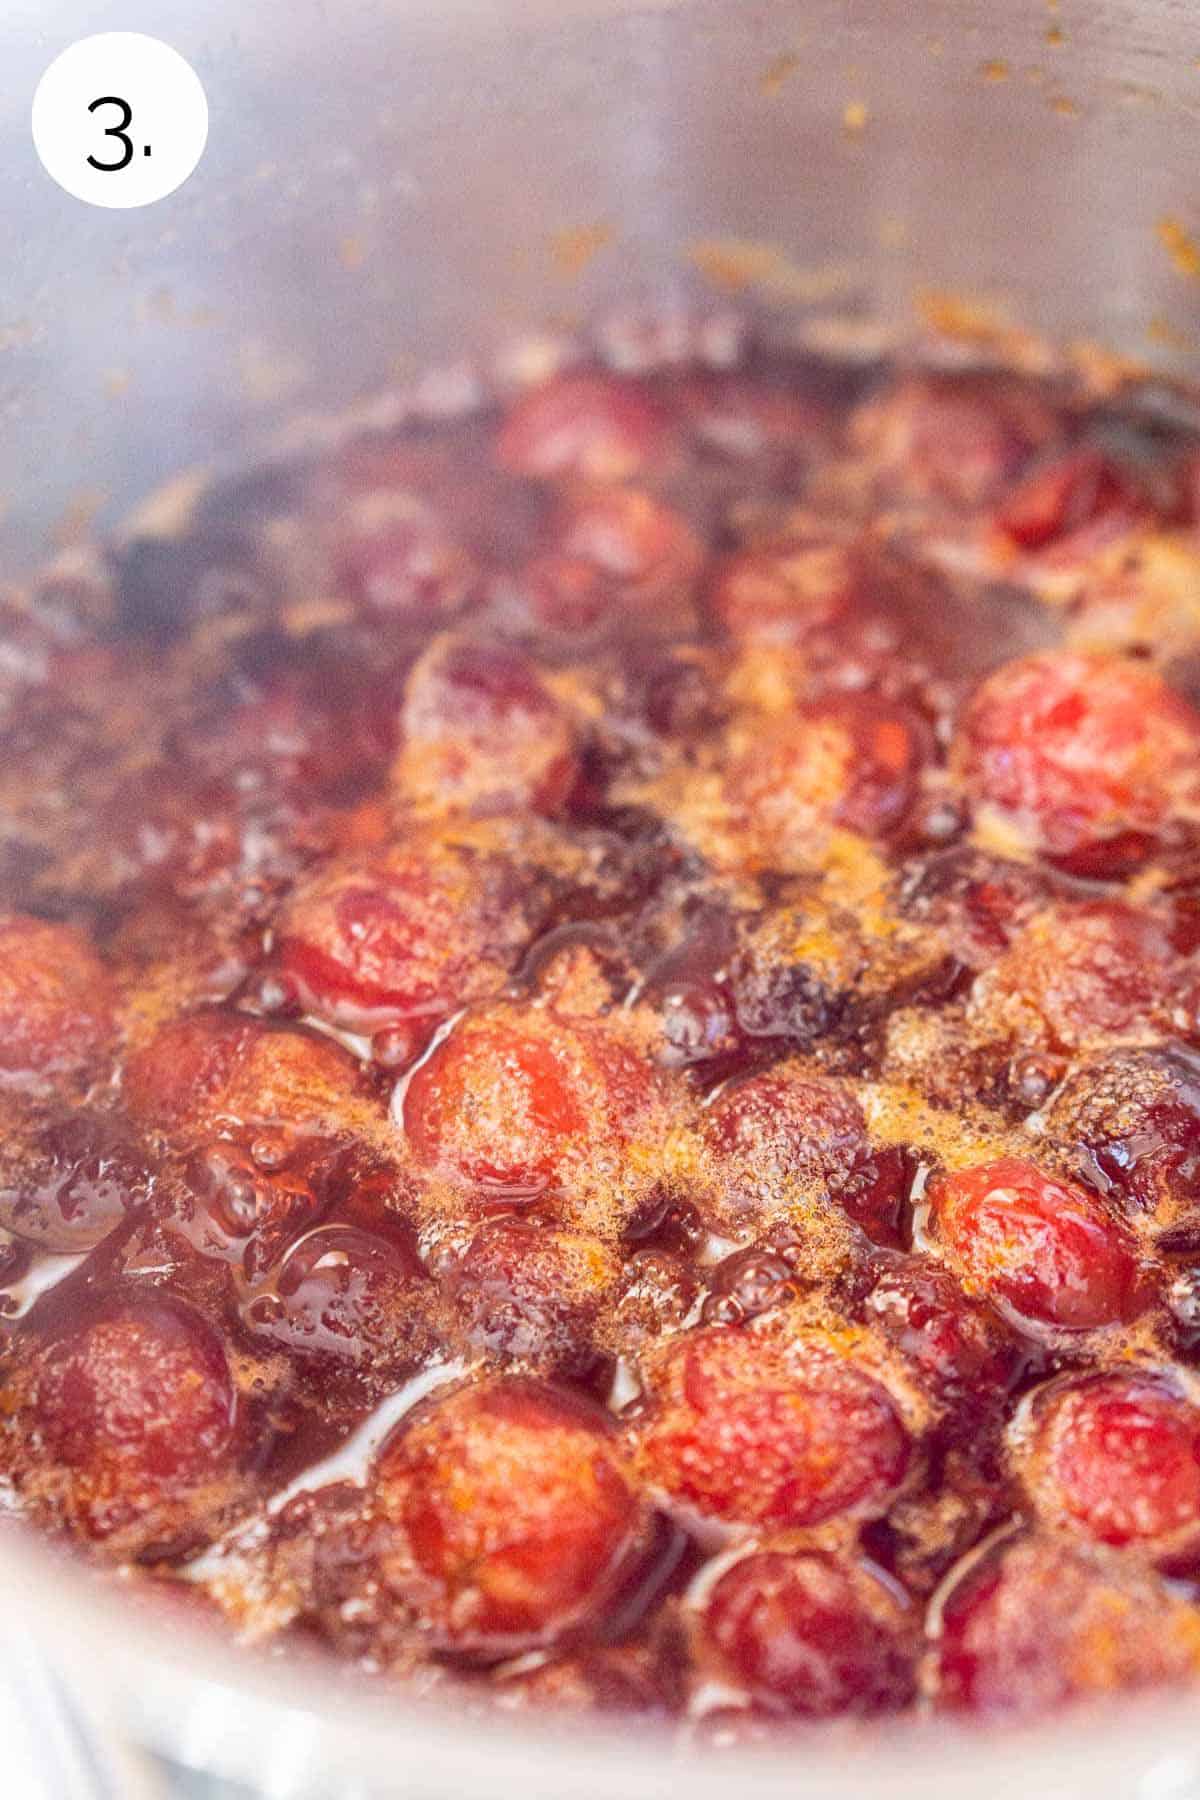 The cranberry syrup simmering on the stove in a small stainless steel saucepan.